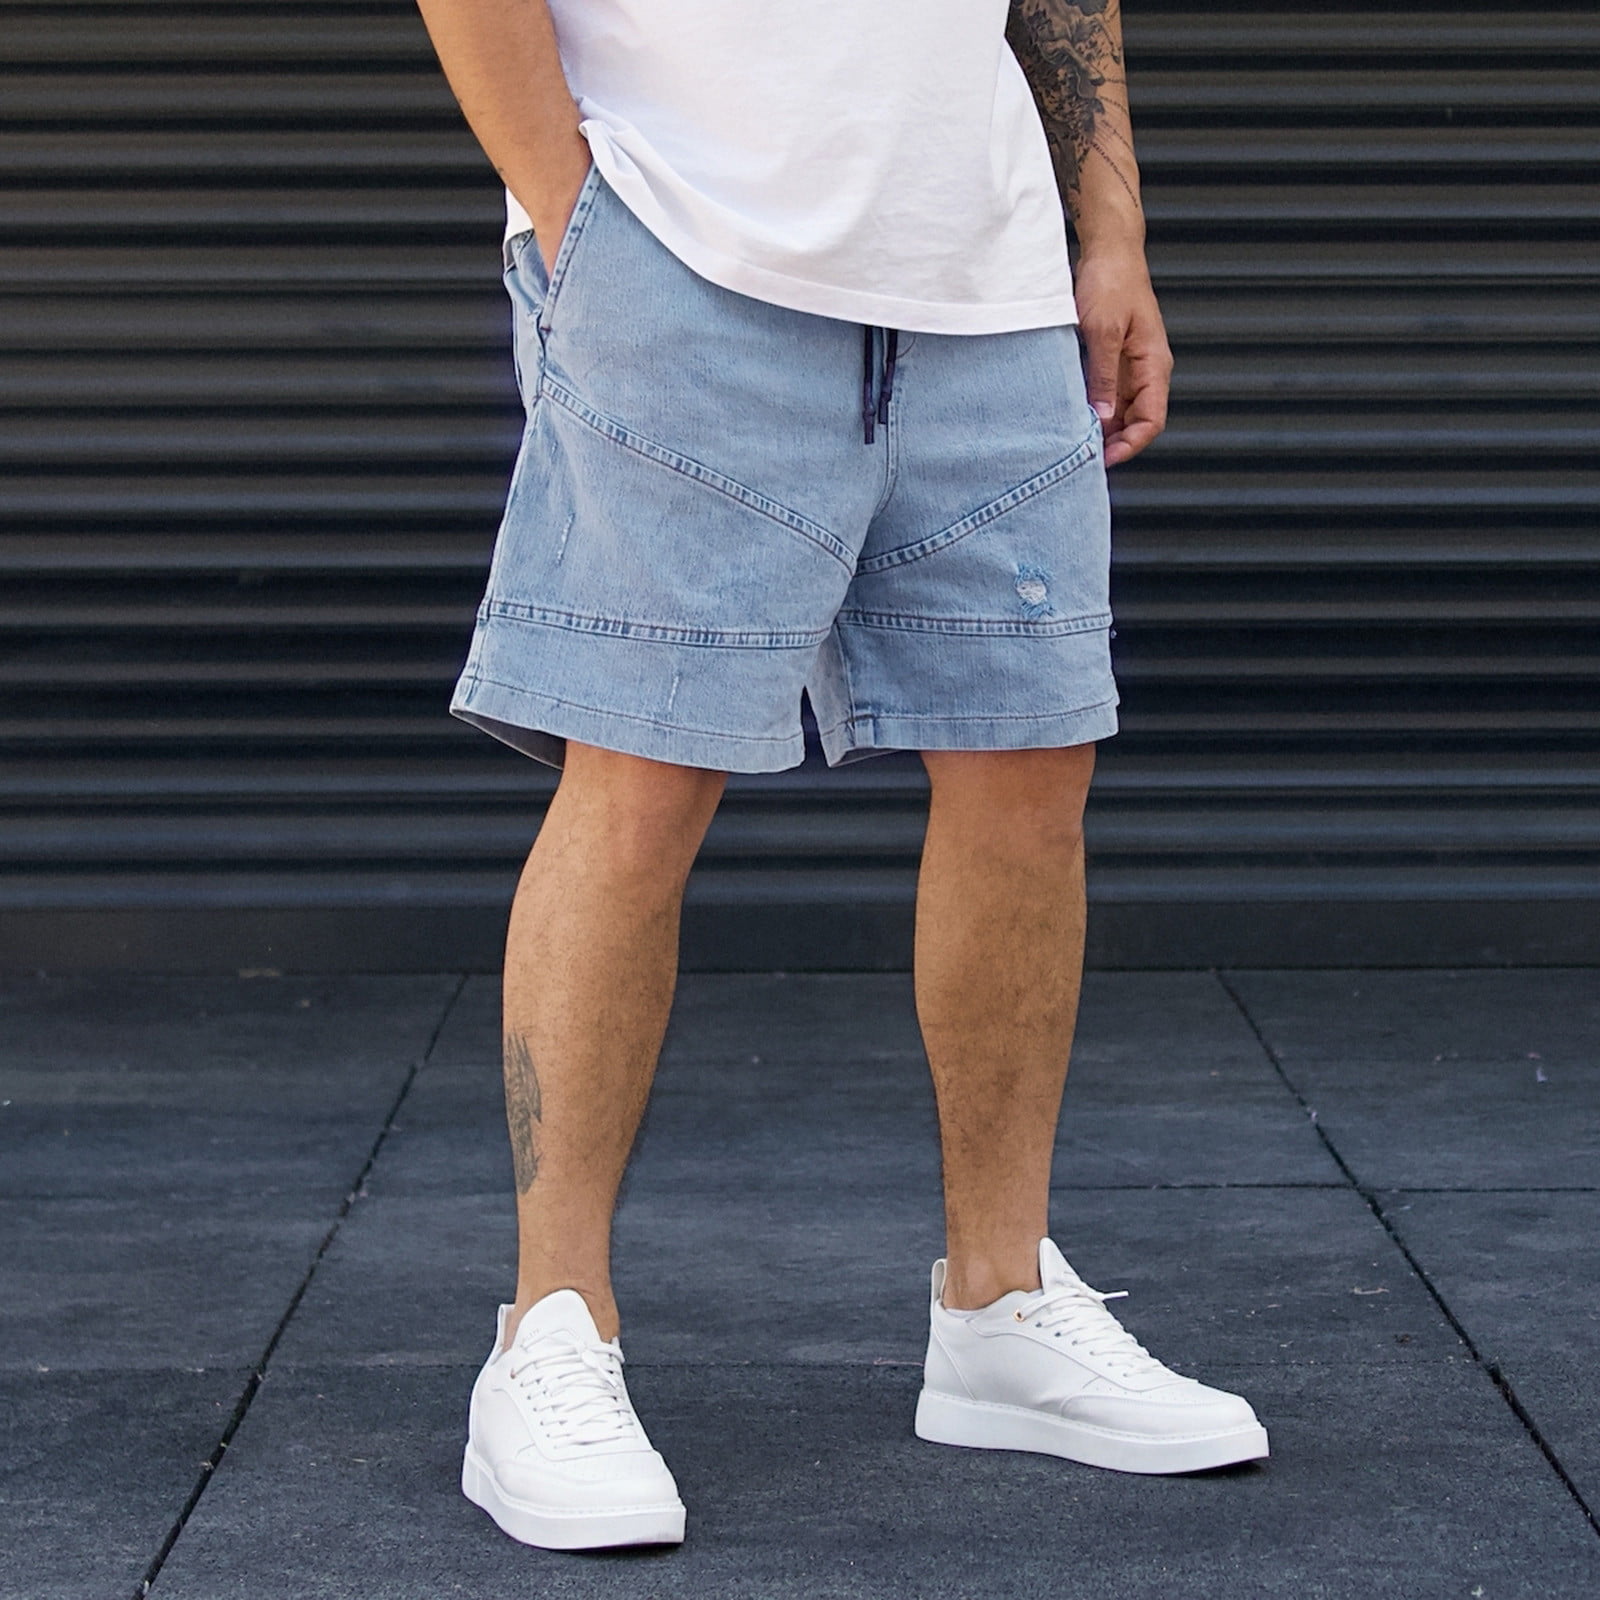 Stylish Mens Baggy Denim Shorts Mens For Summer Plus Size 32 48,  Lightweight At 150kg Perfect For Casual Wear And Guy Clothing Pantalones  Cortos Para Hombre From Iceyyoung, $20.31 | DHgate.Com